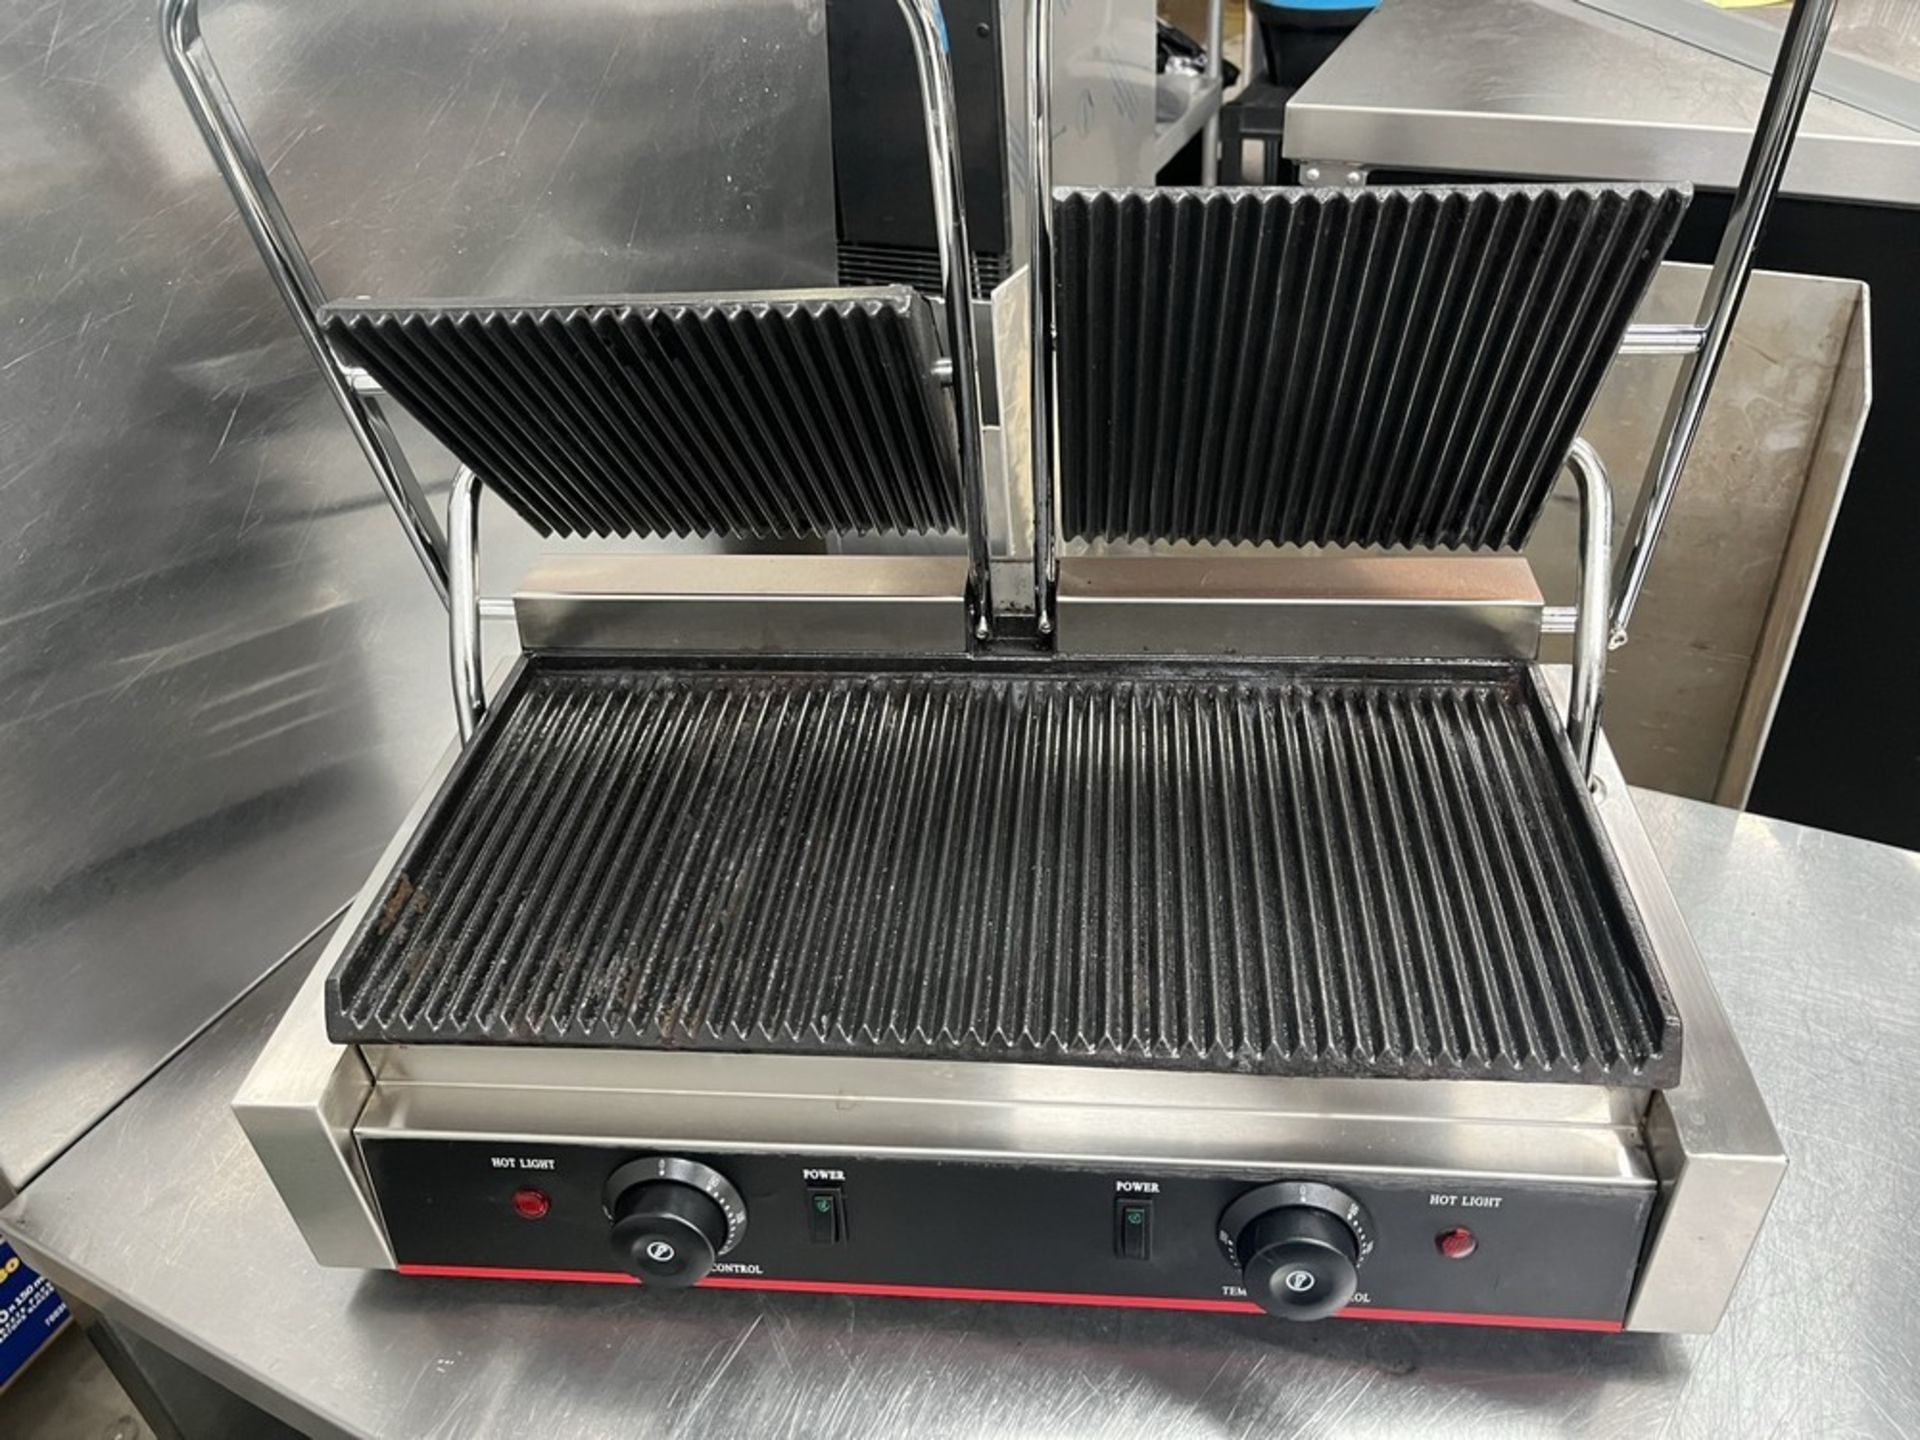 Presse panini douvble Electric Grill, mod: TCG 813, 23'' - Image 2 of 2